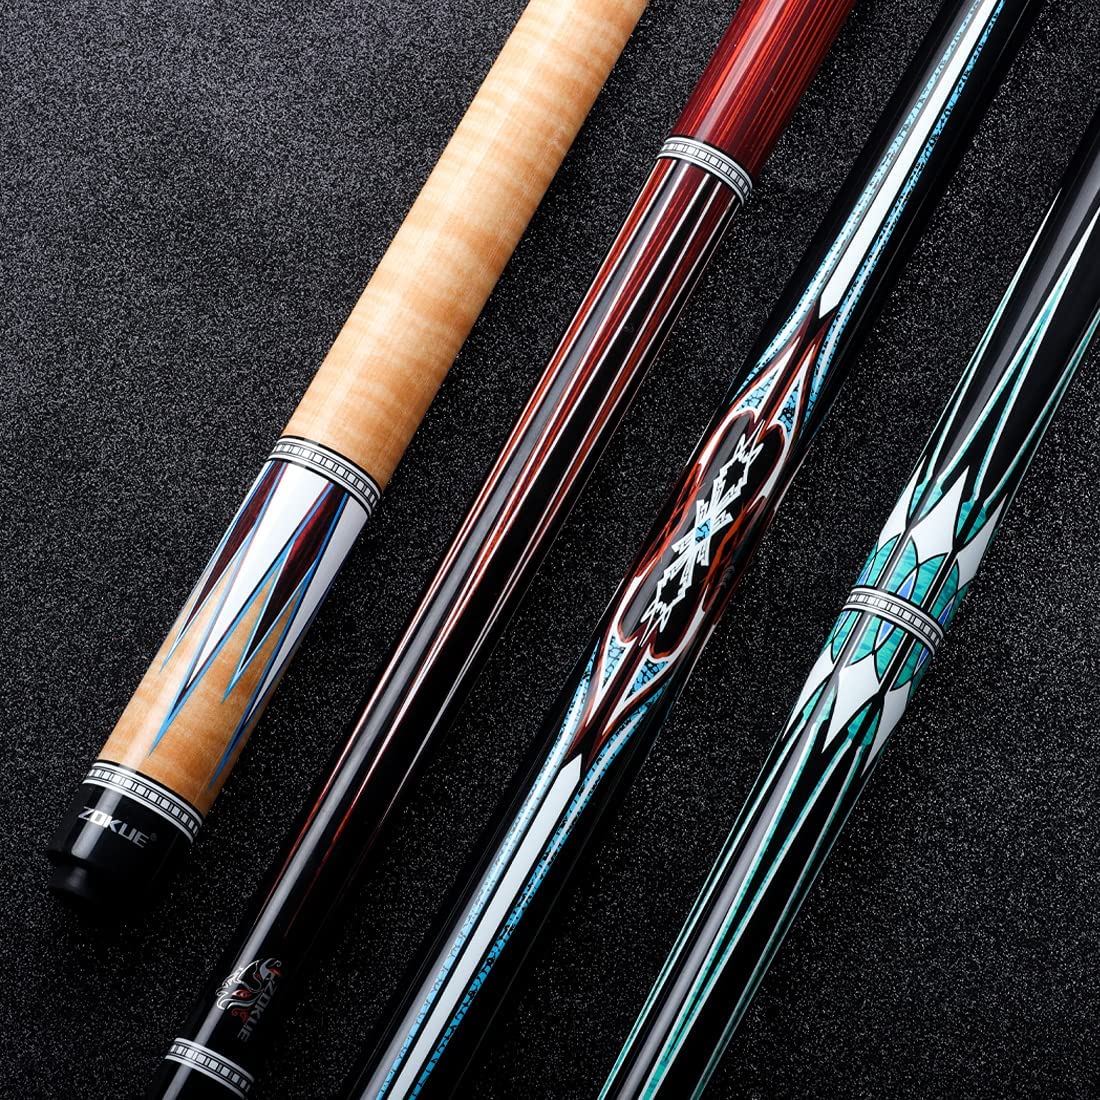 ZOKUE 3 Cushion Carom Cue Stick Billiard Cue Stick Kit with Case (142cm, 12mm Sea-Eye Tip, Radial Pin Joint, Adjustable Weight,